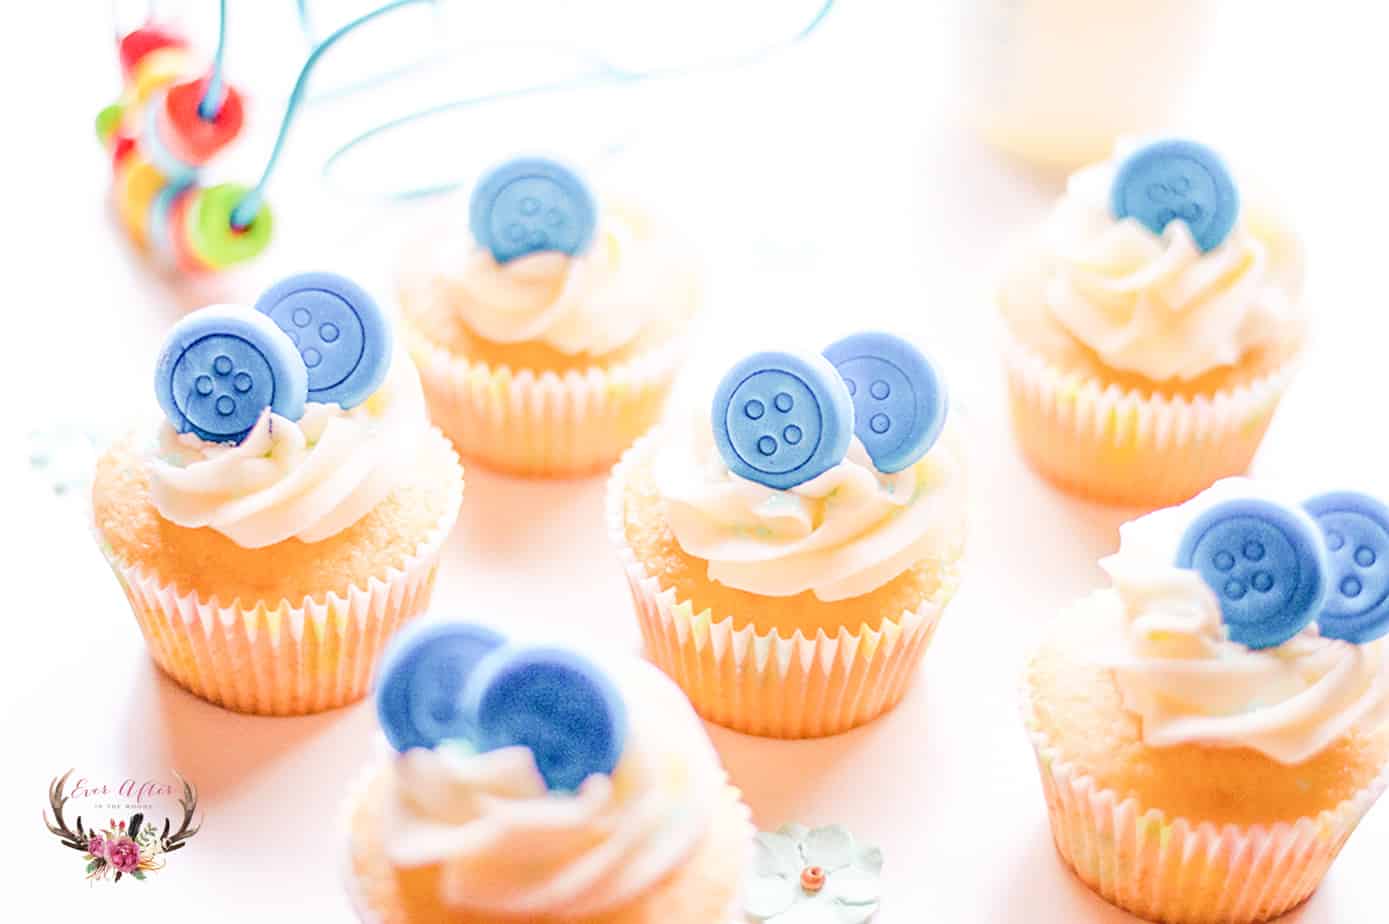 These button cupcakes are the perfect dessert for a gender neutral baby shower. Simply make your cute buttons from the color of your shower theme.